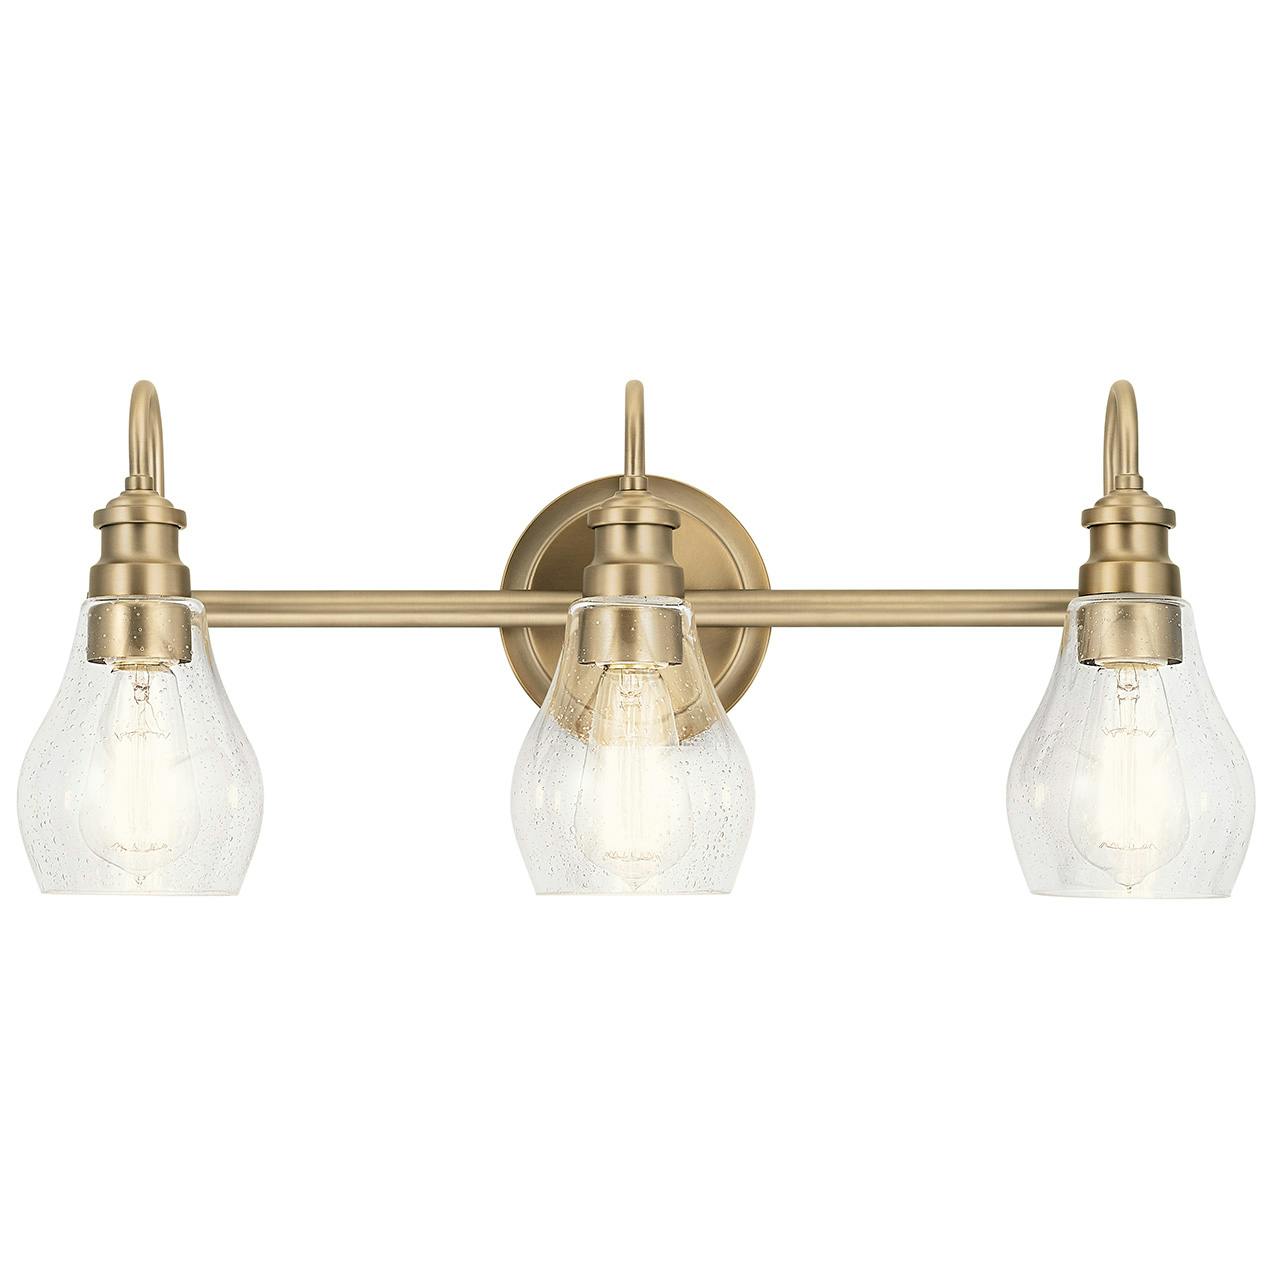 The Greenbrier 3 Light Vanity Light Bronze facing down on a white background